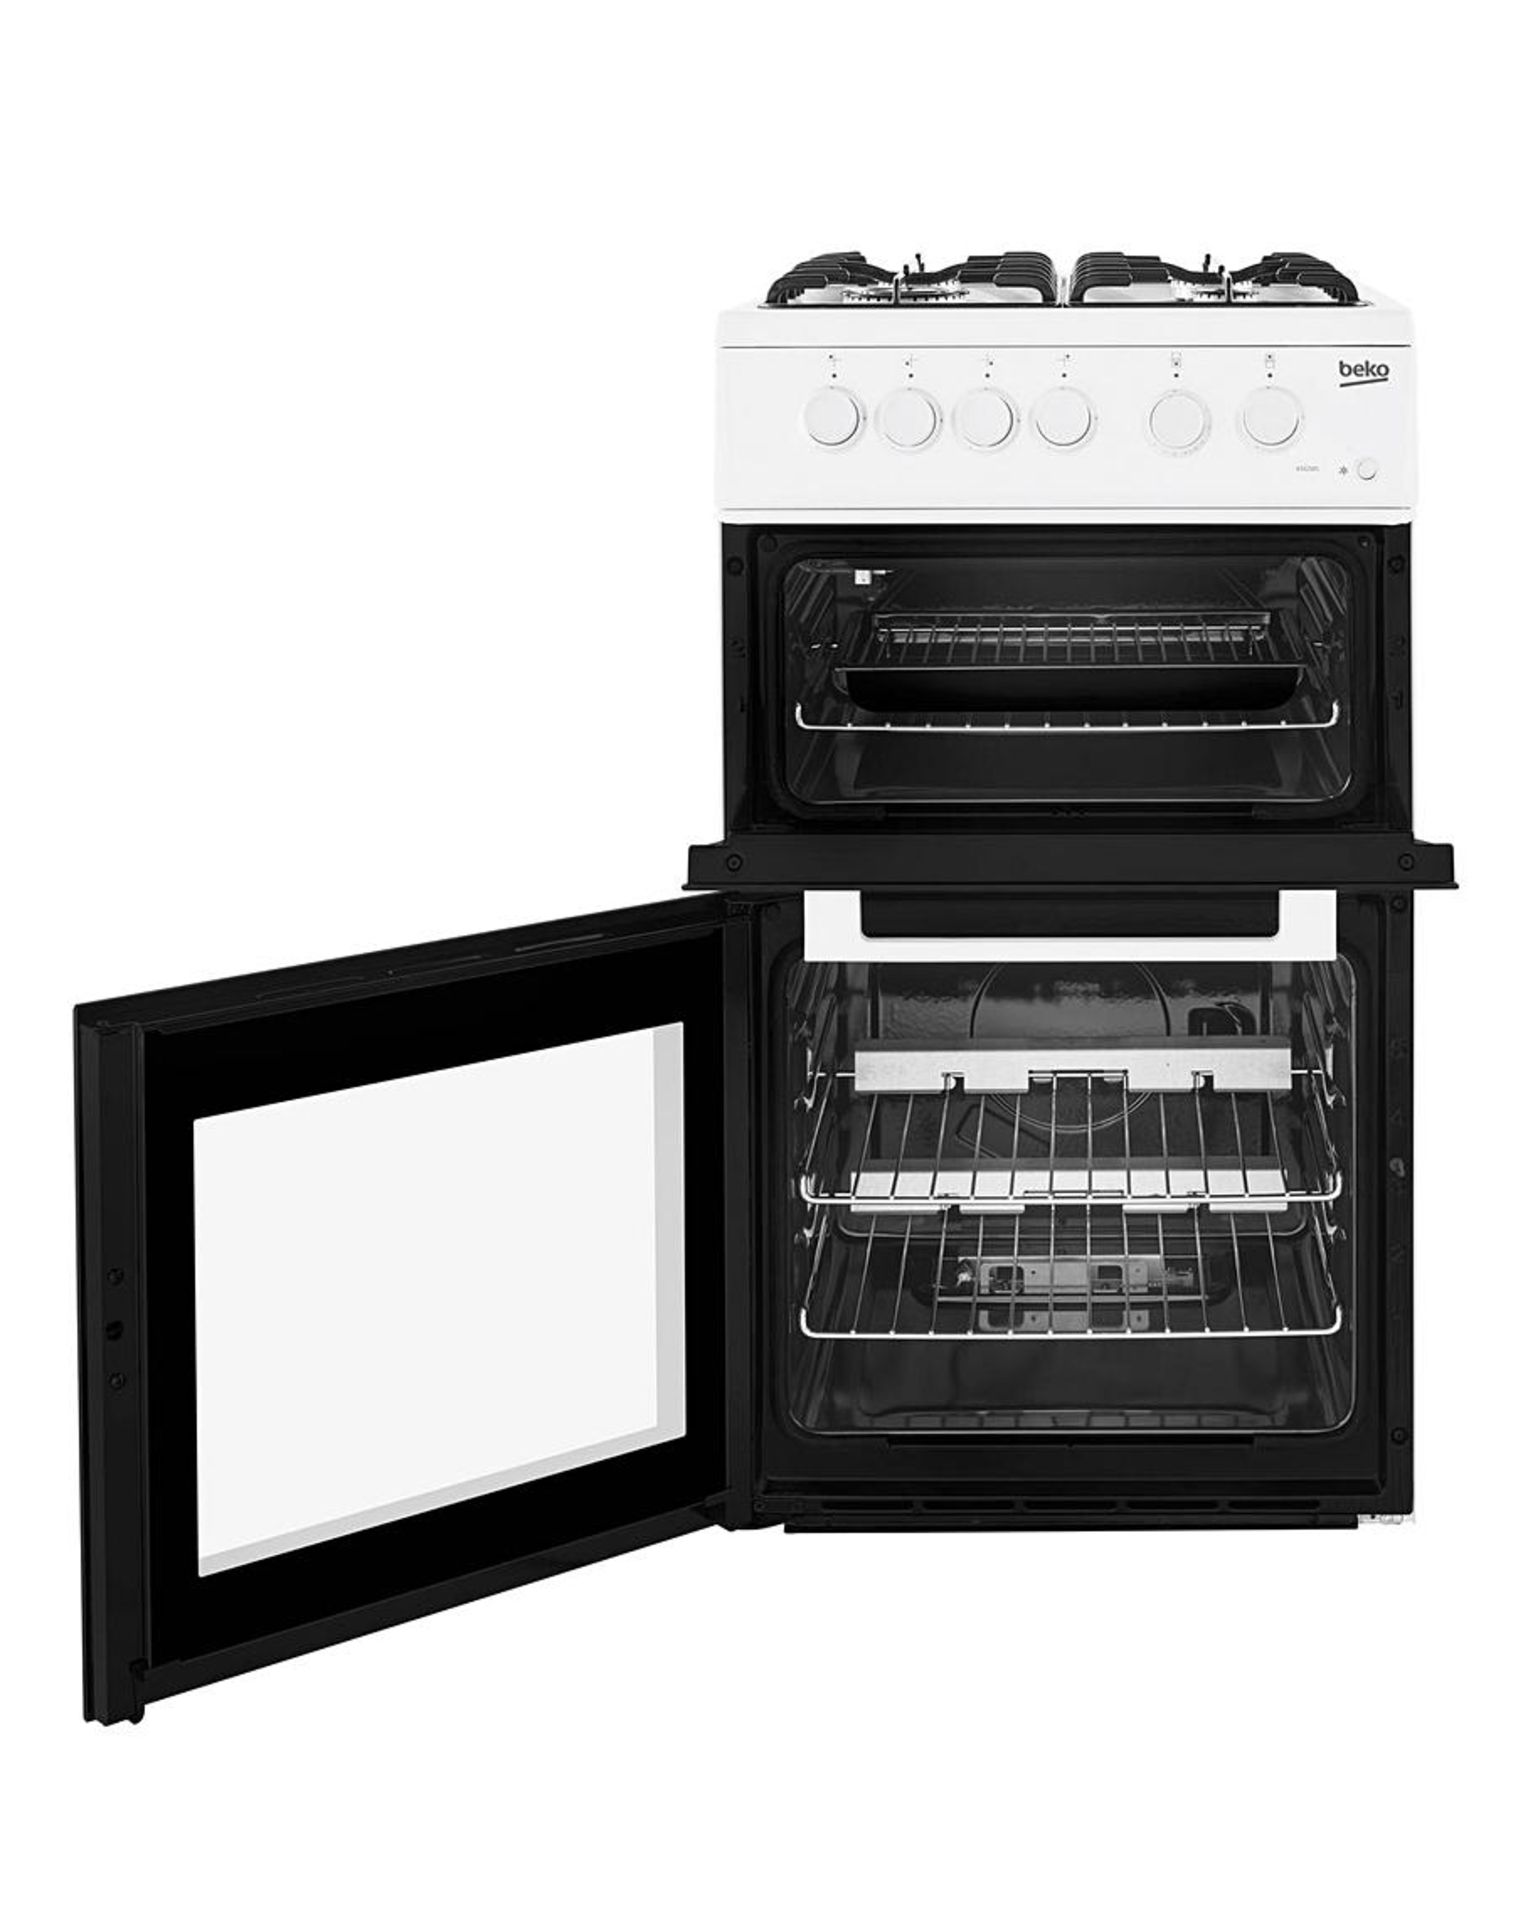 Beko KDG581W Freestanding Gas Cooker with Gas Grill - White. RRP £699.99. Cooking for your family is - Image 2 of 2